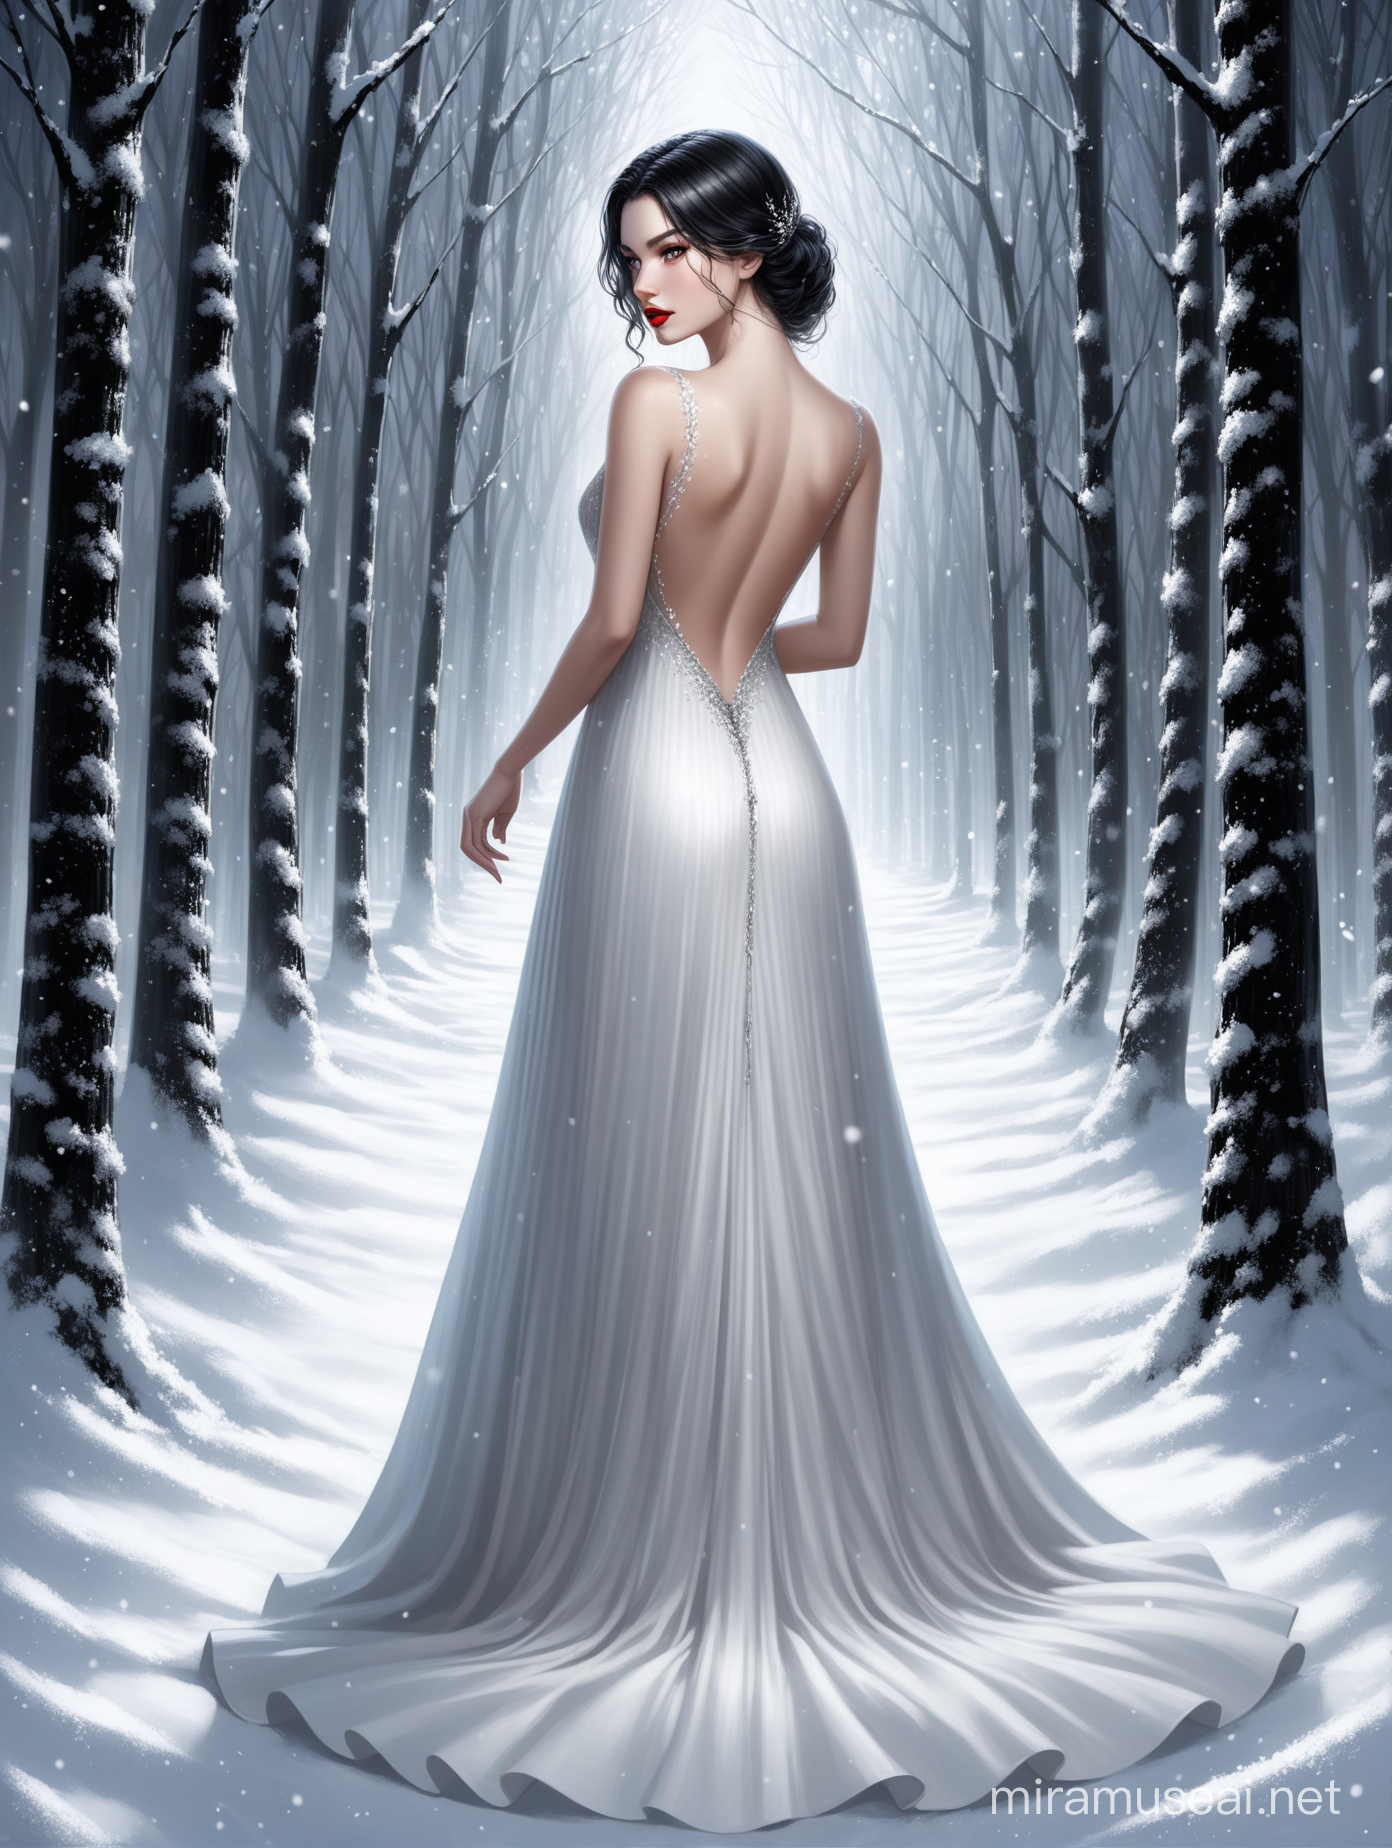 Beautiful Young Woman in Snowy Forest Fairy Tale Realism